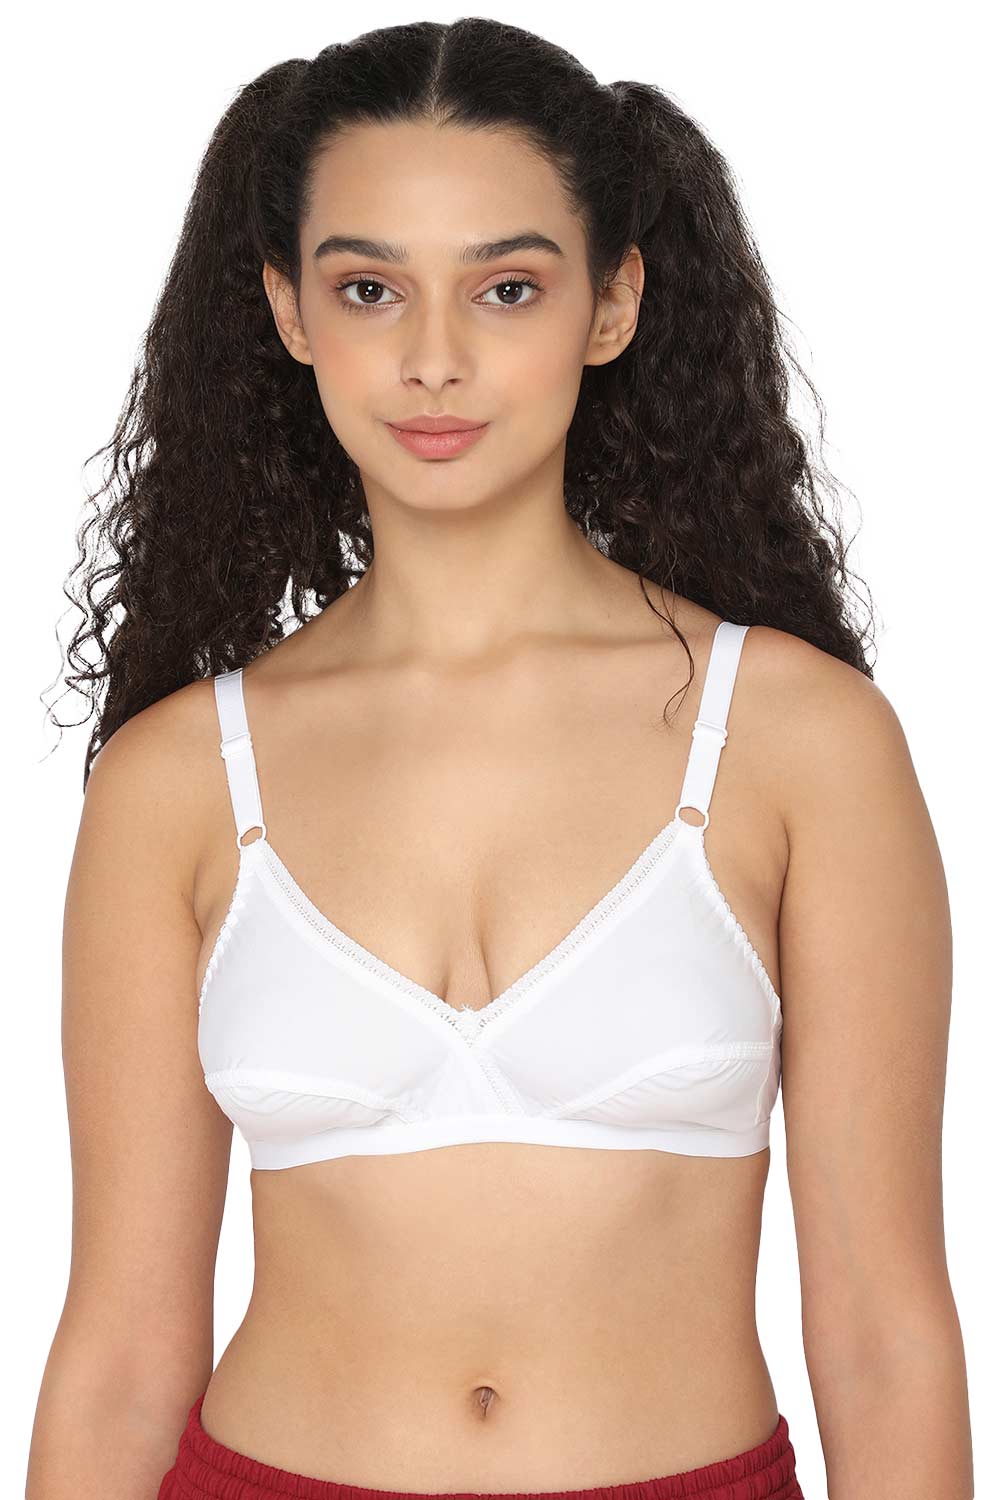 Naidu Hall Heritage-Bra Special Combo Pack - Lovable - C41